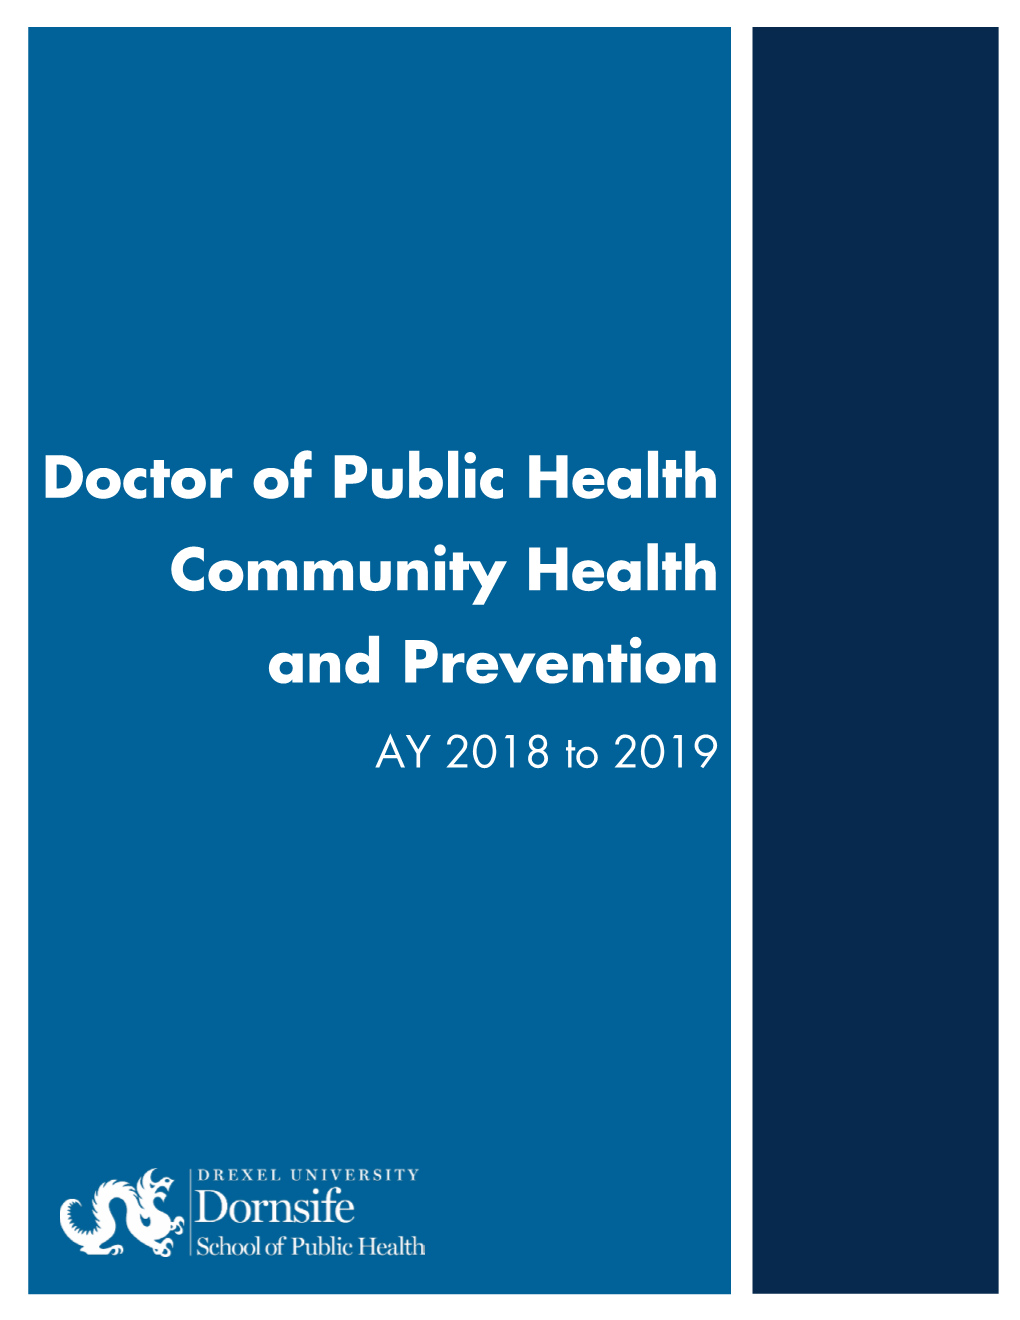 Doctor of Public Health in Community Health and Prevention